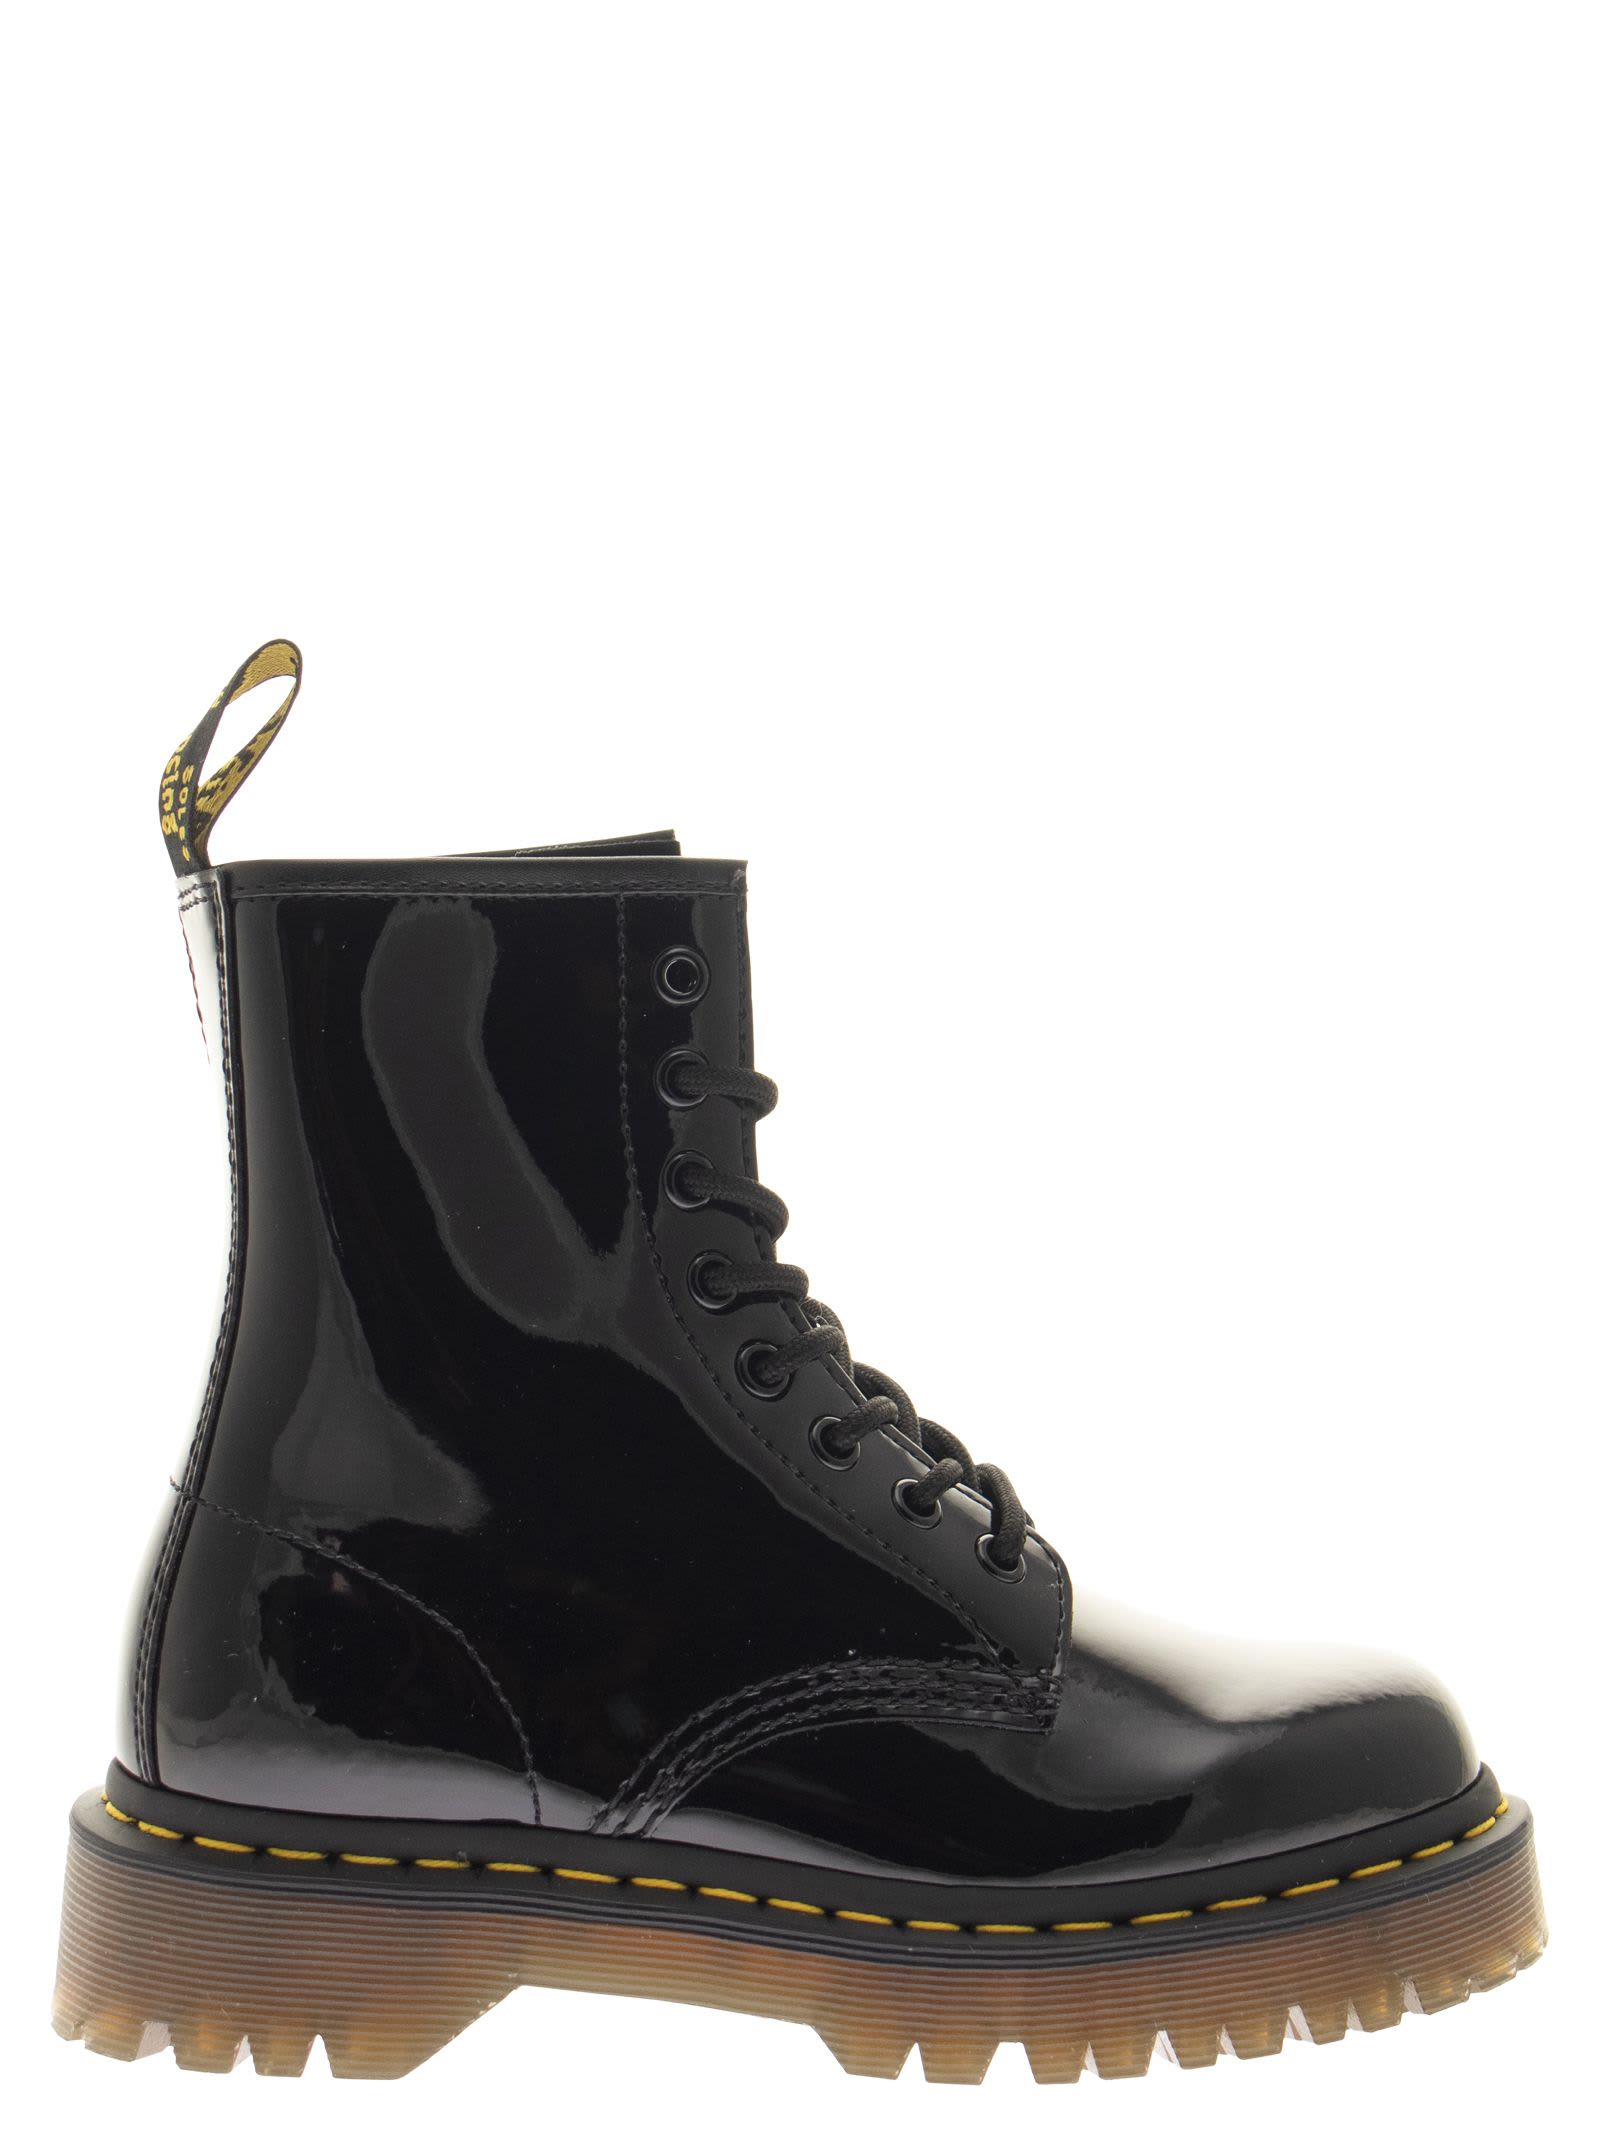 Dr. Martens Patent Leather Ankle Boots 1460 Bex